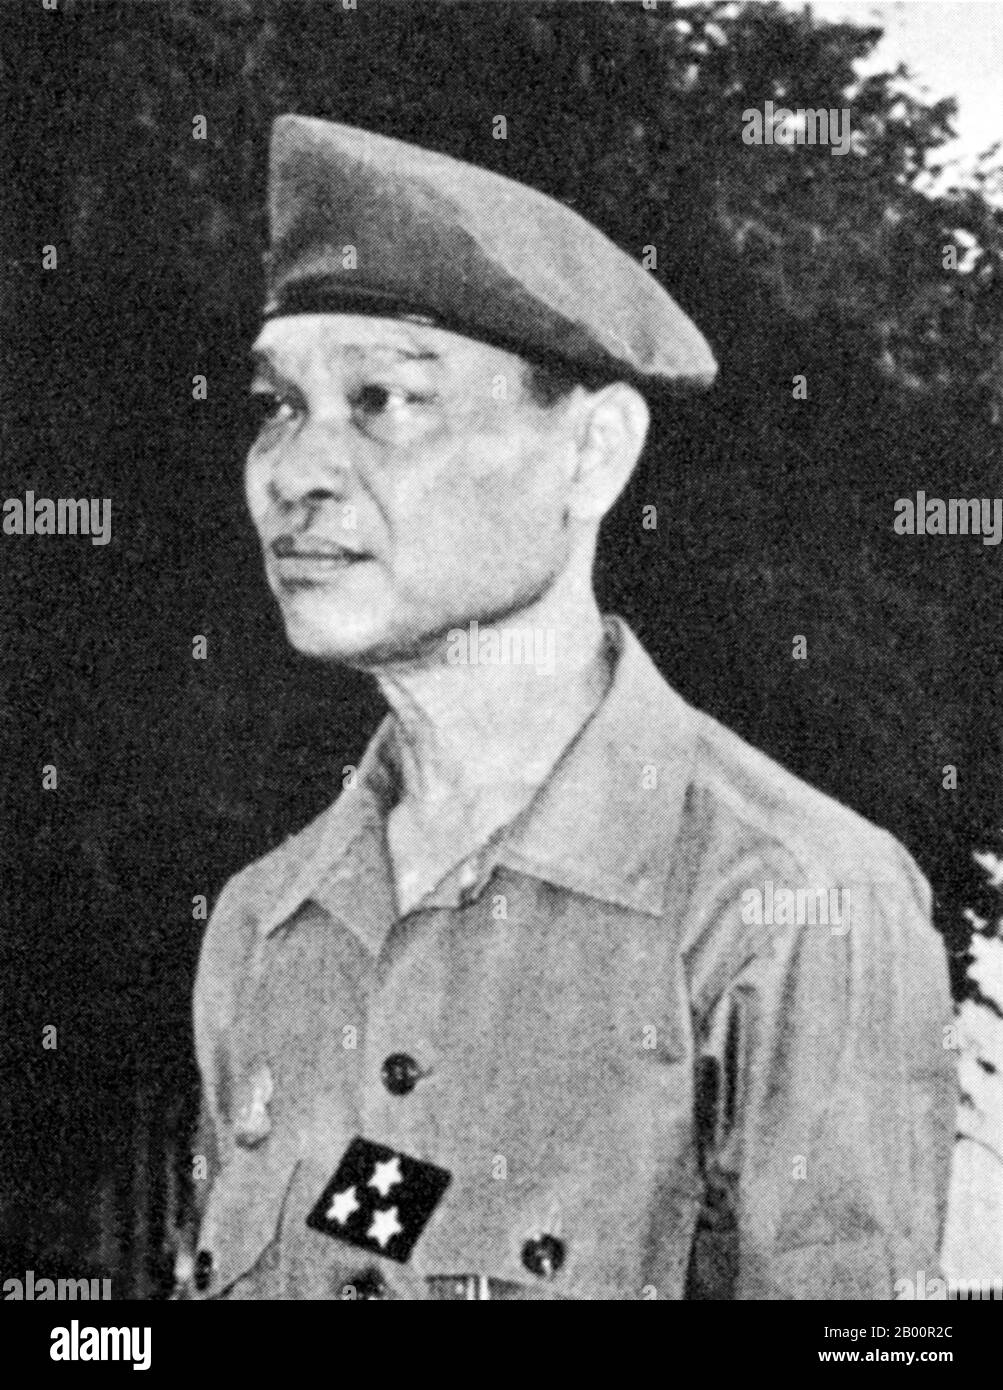 Cambodia: Neak Ang Rajavong Sisowath Sirik Matak (1914-1975).  Prince Sisowath Sirik Matak (January 22, 1914 — April 21, 1975) was a member of the Cambodian royal family. He was mainly notable for his involvement in the 1970 right-wing coup against his cousin, Prince Norodom Sihanouk, and for his subsequent establishment, along with Lon Nol, of the Khmer Republic. He refused to flee the advancing Khmer Rouge and was captured and executed in April, 1975. Stock Photo